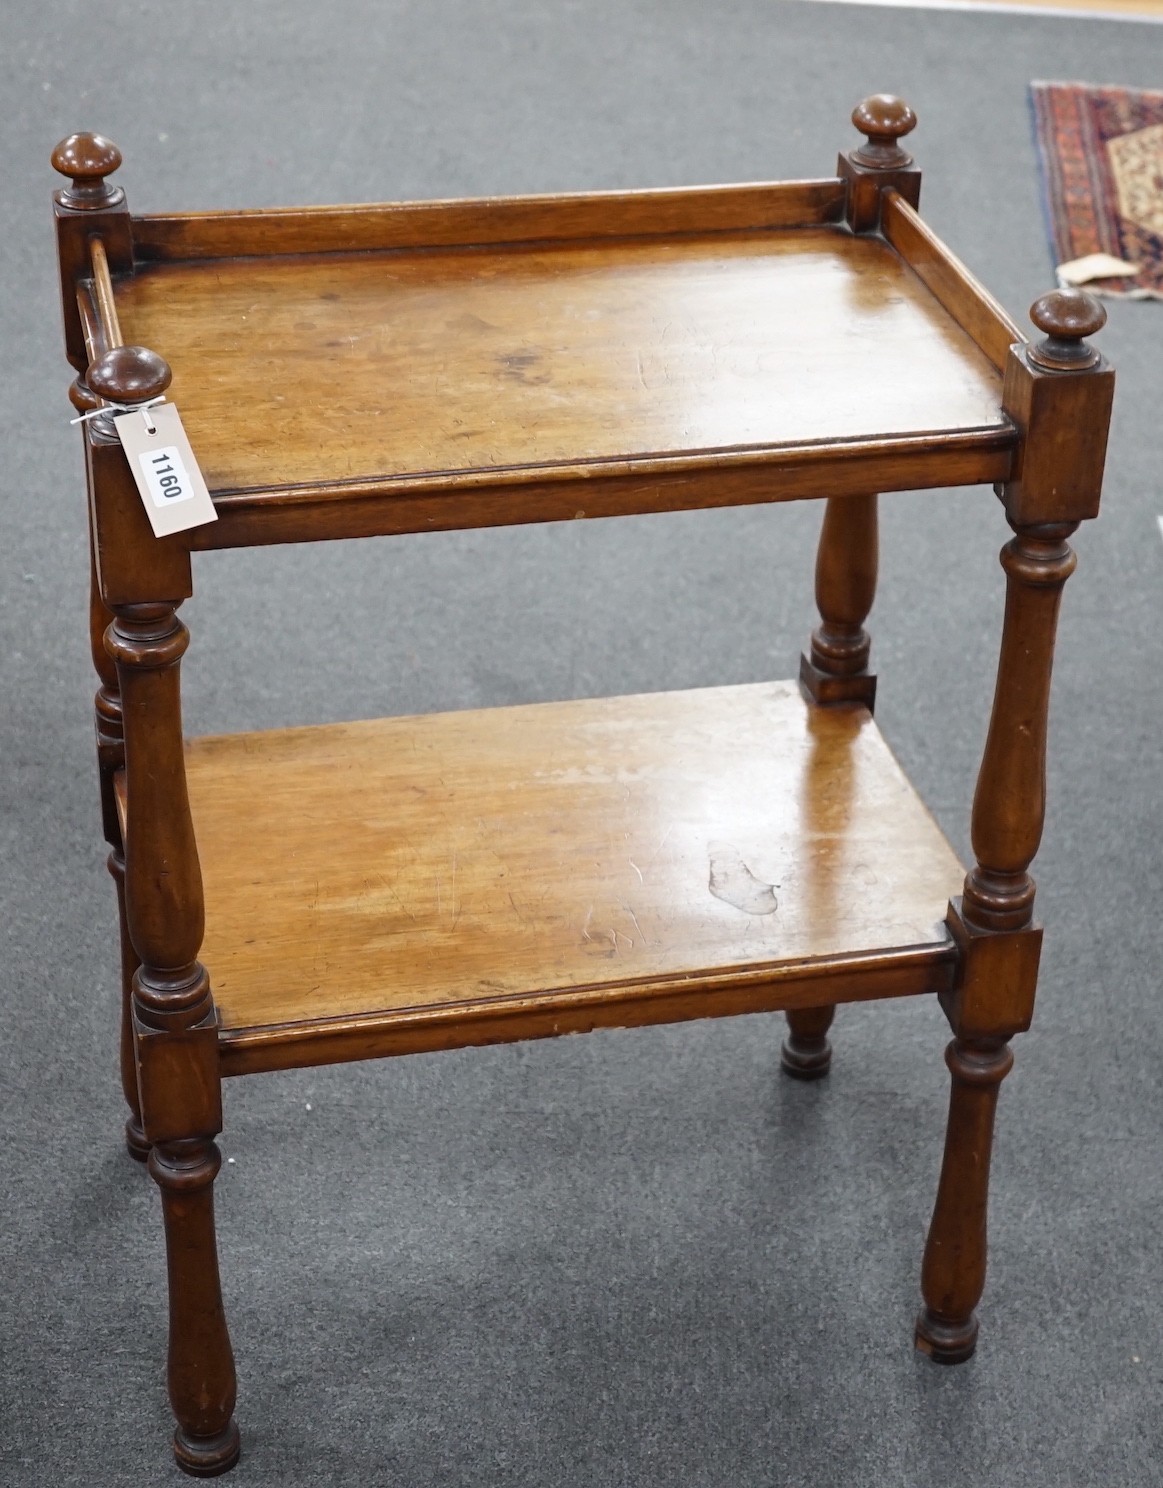 The upper part of a Victorian mahogany whatnot with galleried top, width 59cm, depth 39cm, height 83cm.